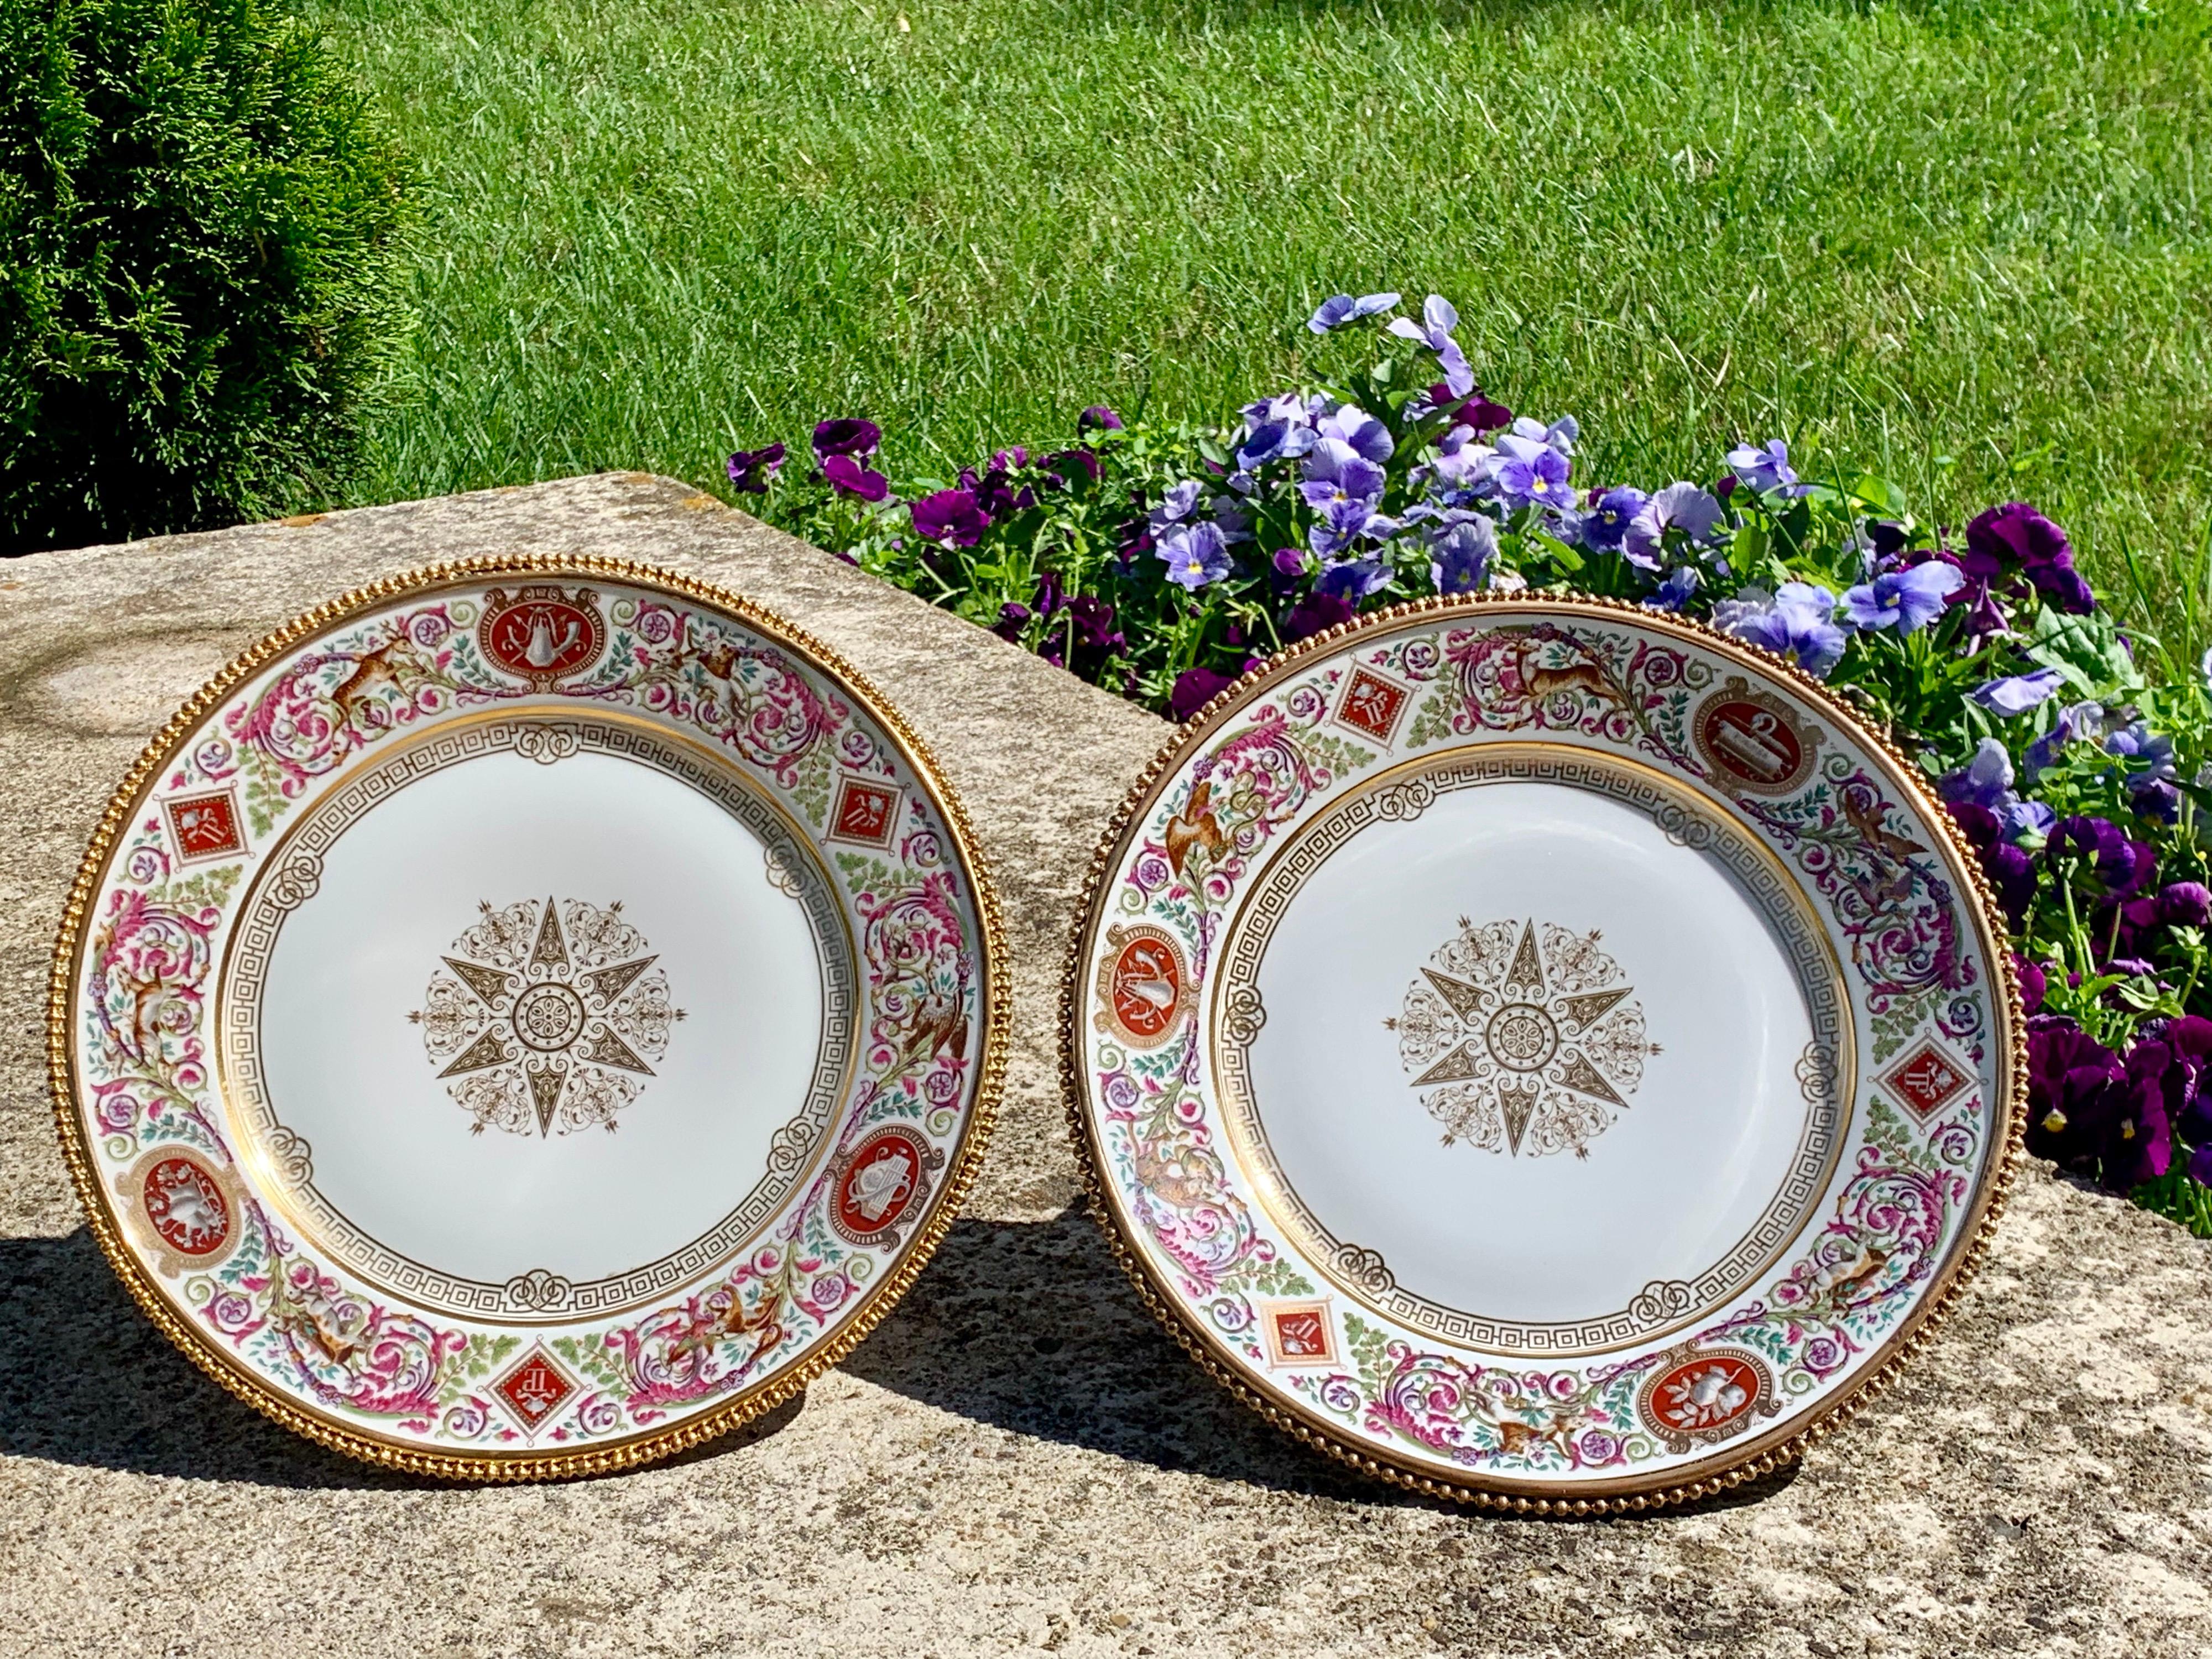 A fine pair of Sèvres Tazzas from King Louis Philippe